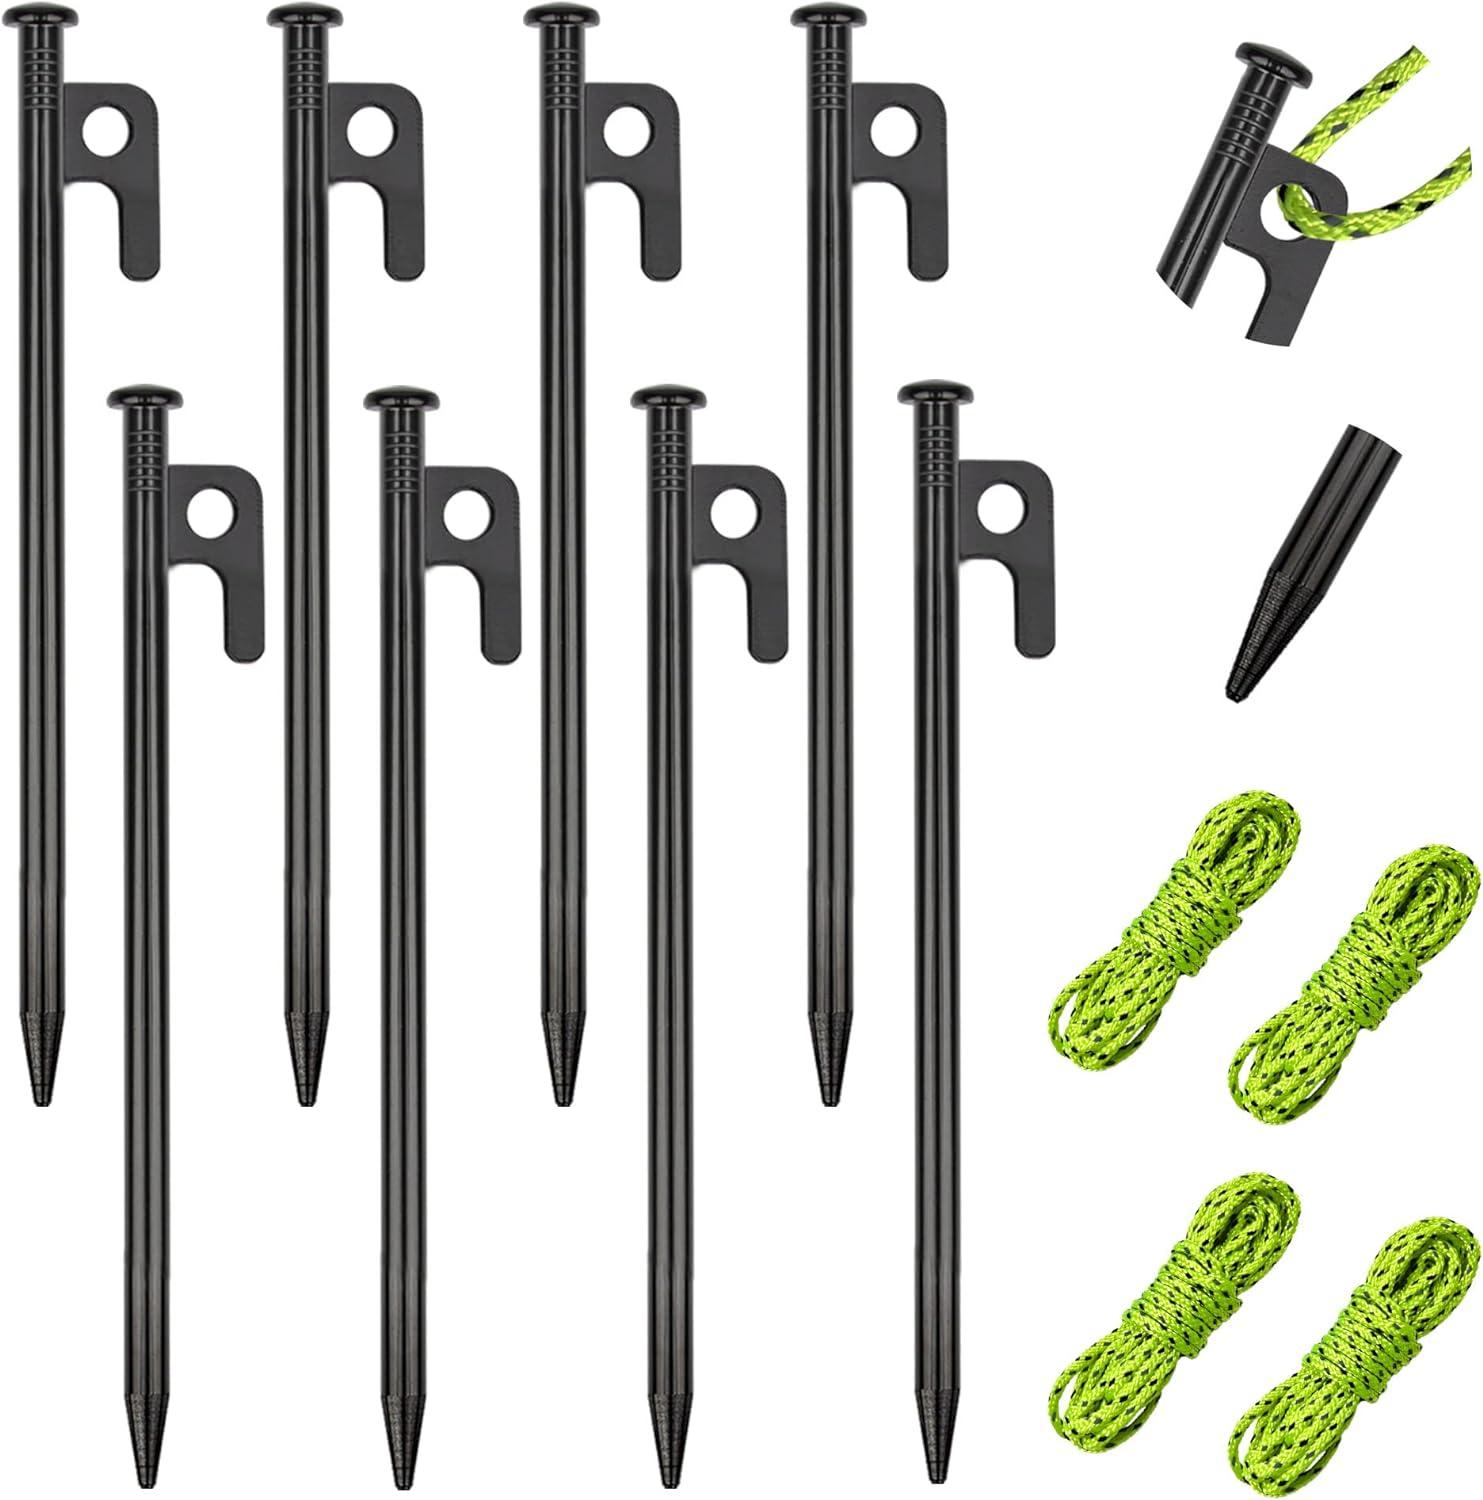 8 Pack Tent Stakes Heavy Duty Metal Tent Pegs for Camping Steel